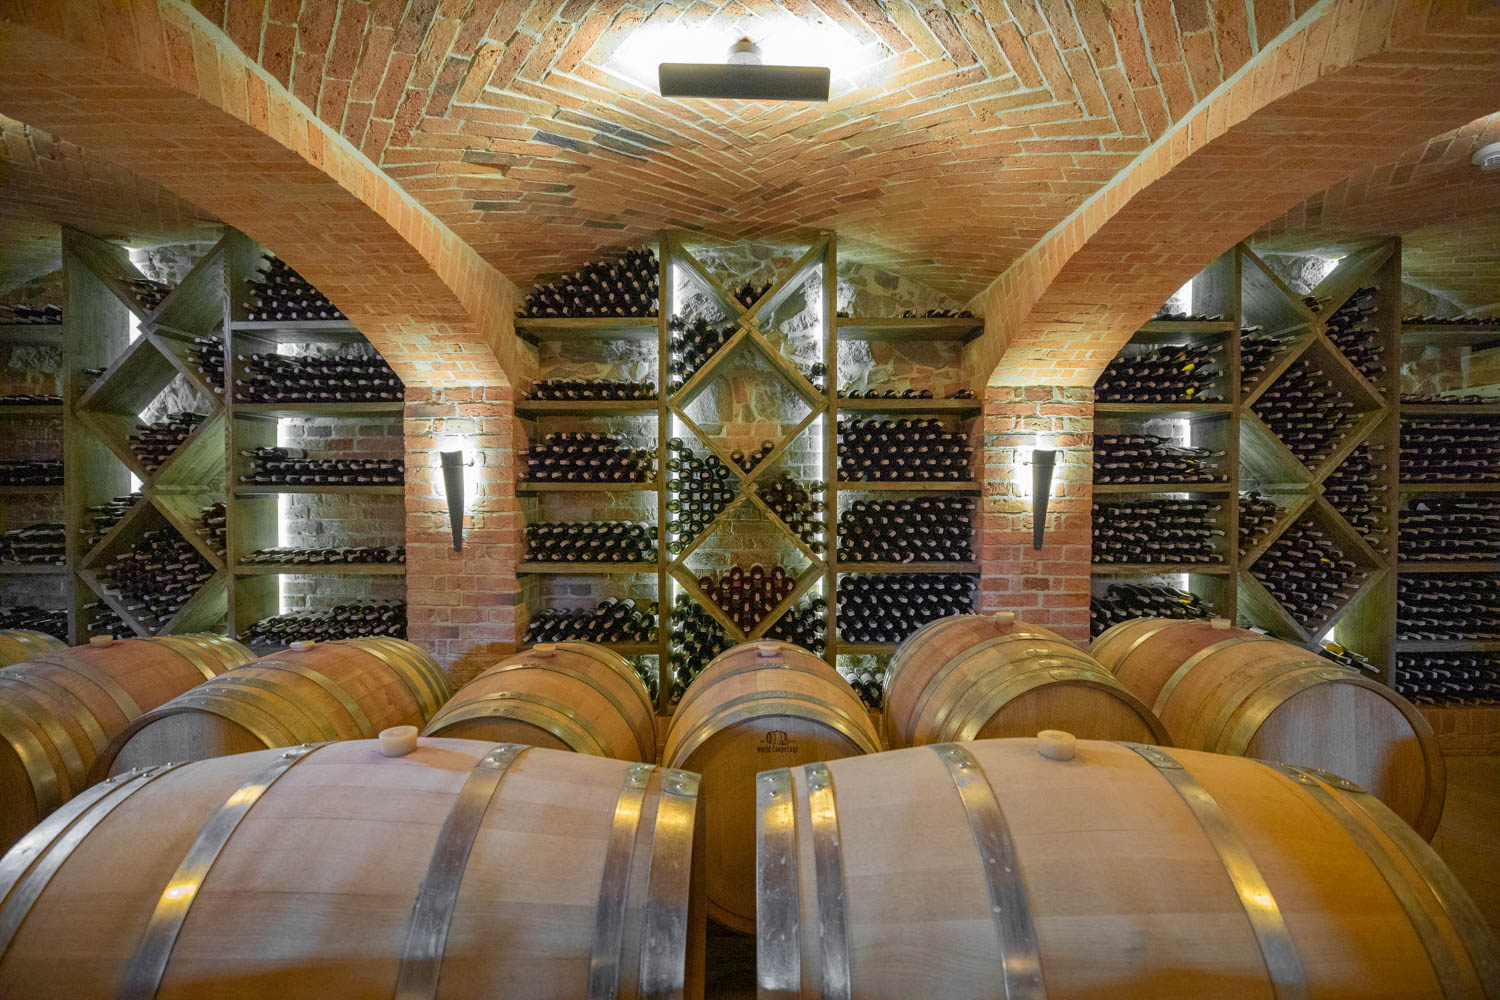 Wine cellar at the Wine spa in Poland Palac Mierzecin 